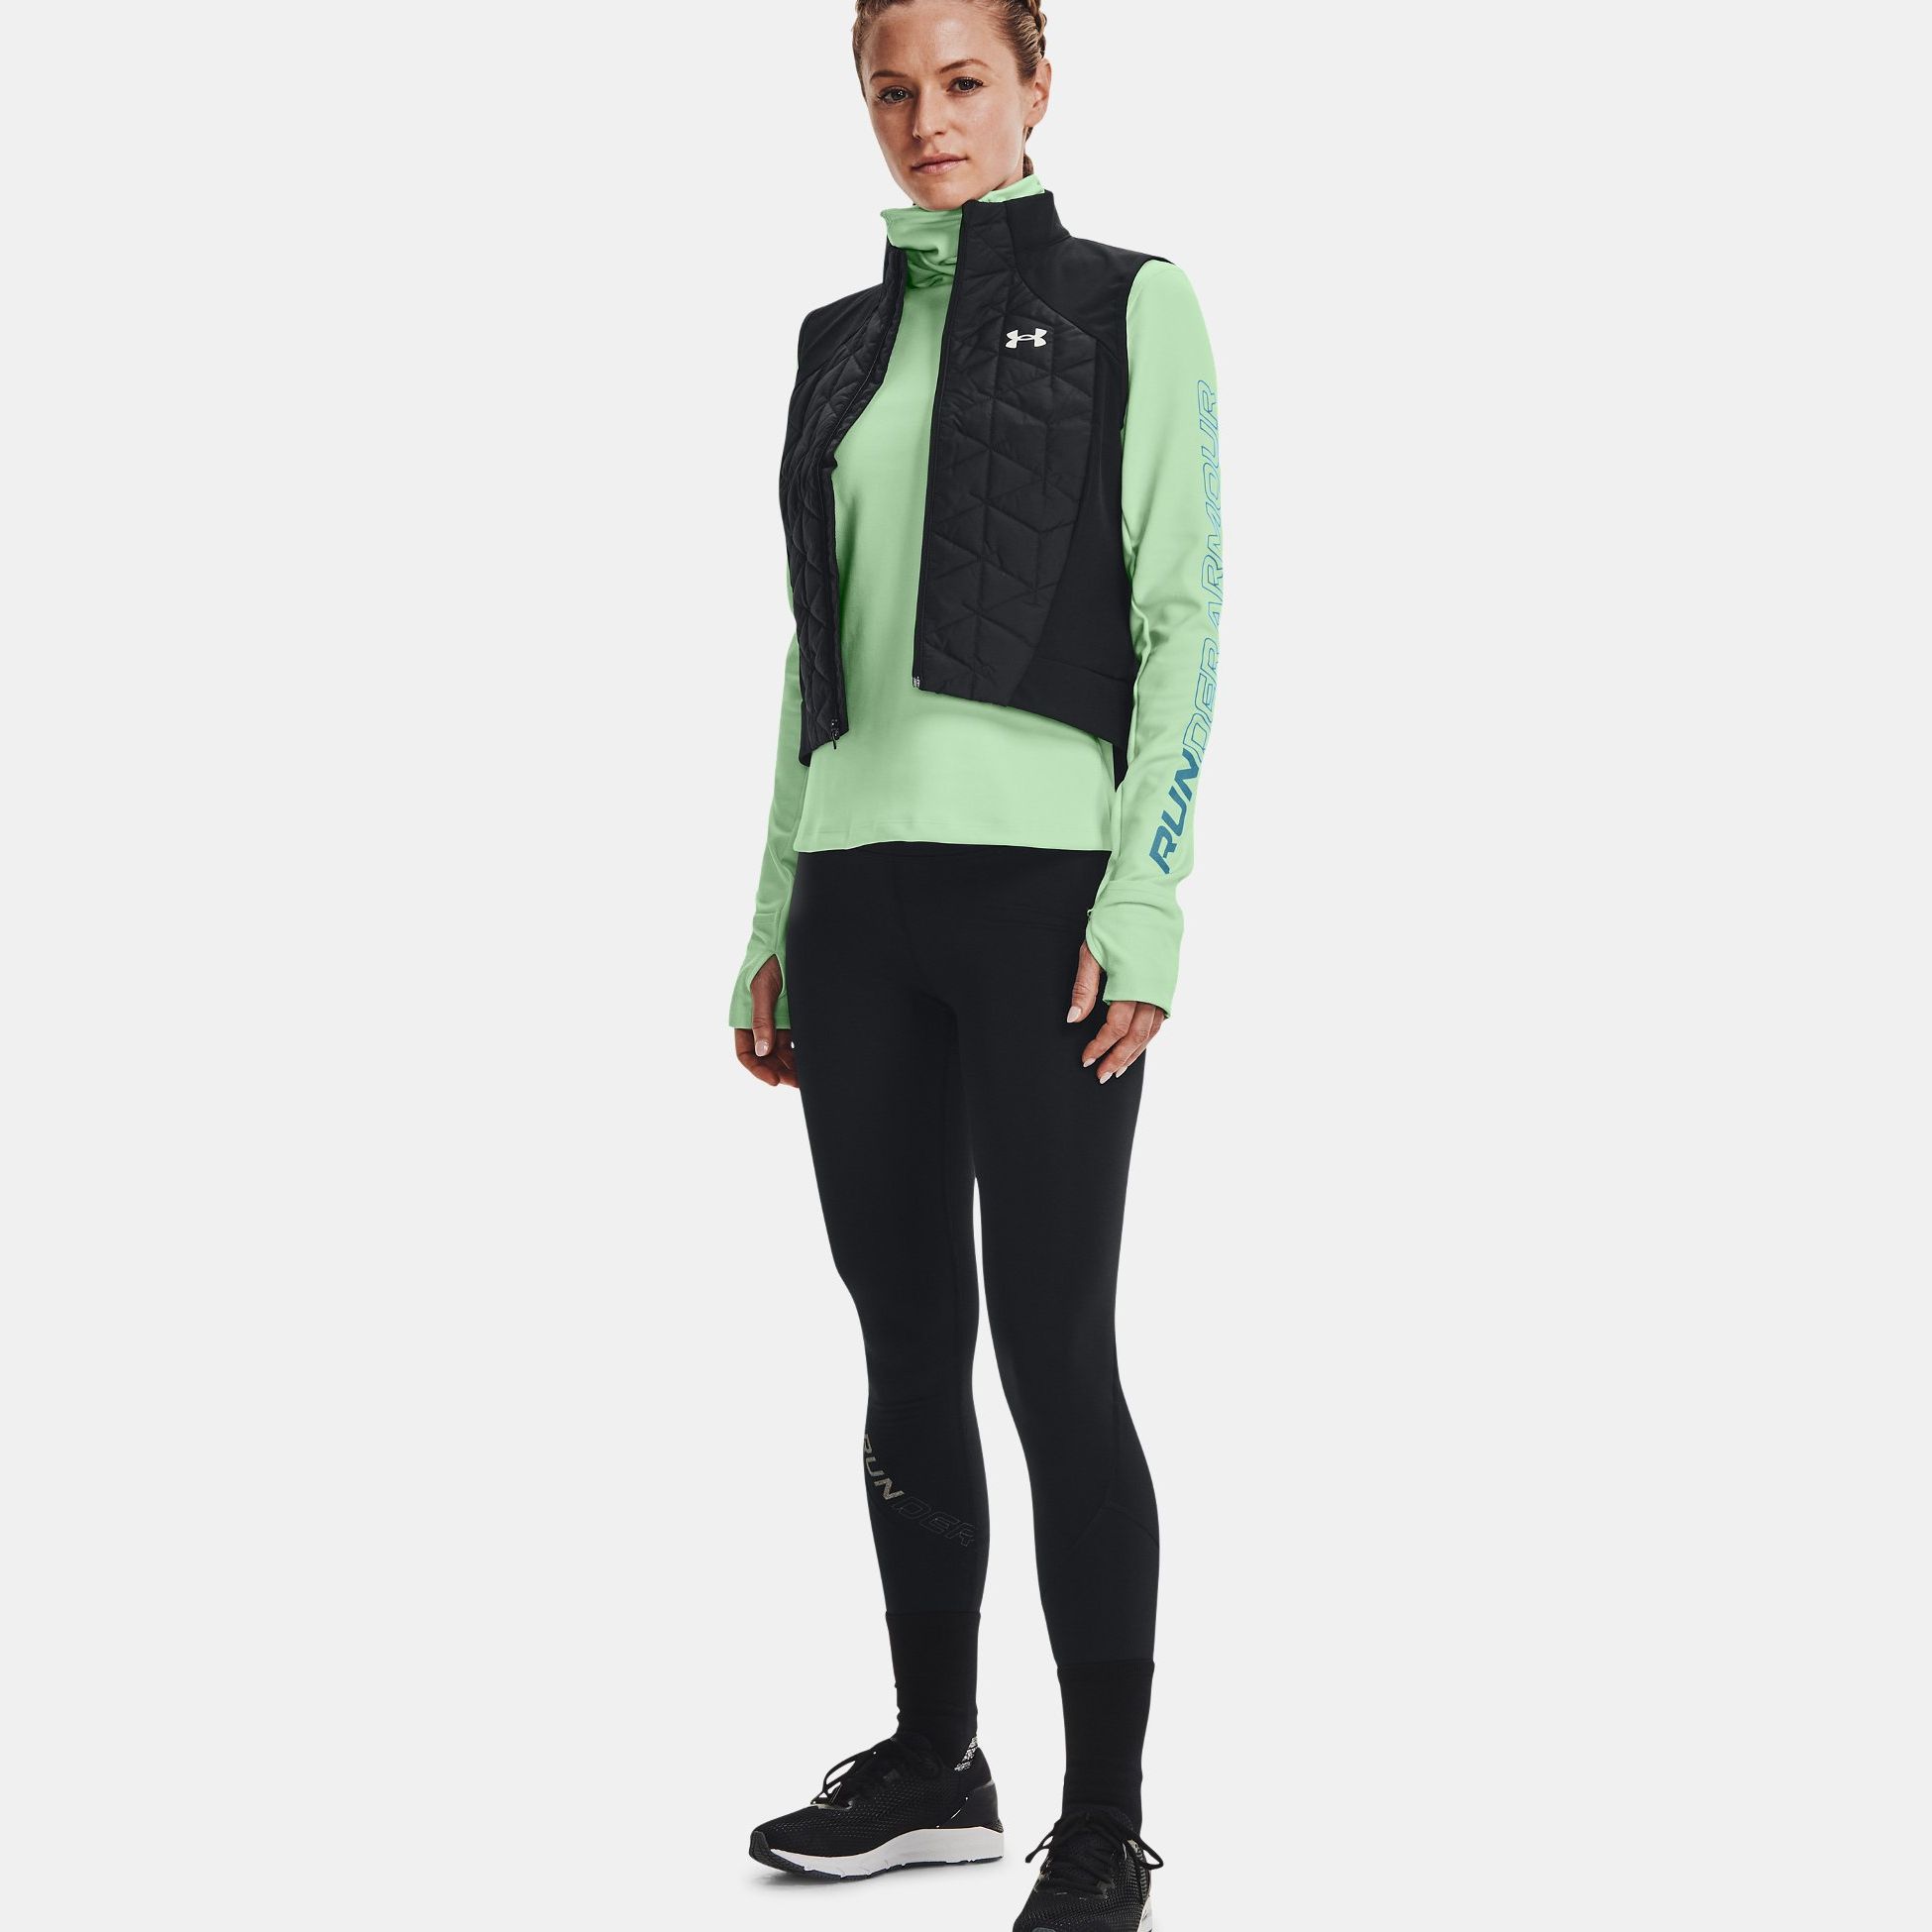 Leggings & Tights -  under armour Empowered Run Tights